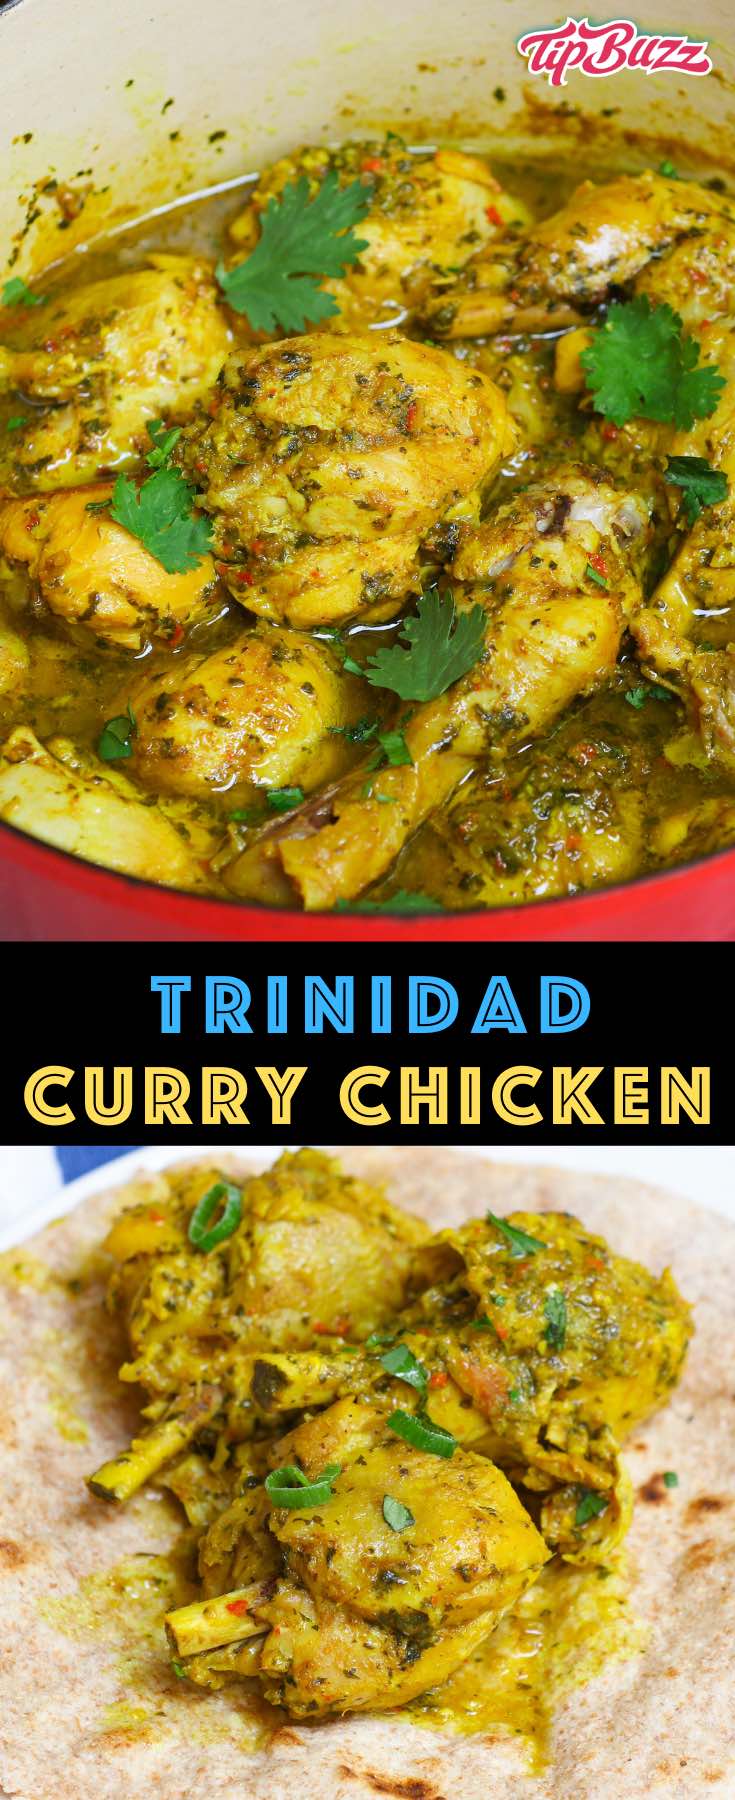 This Trinidad Curry Chicken will satisfy all your cravings for the West Indies! It's full of fiery, fragrant flavors and easy to make in less than an hour. #trinicurrychicken #currychicken